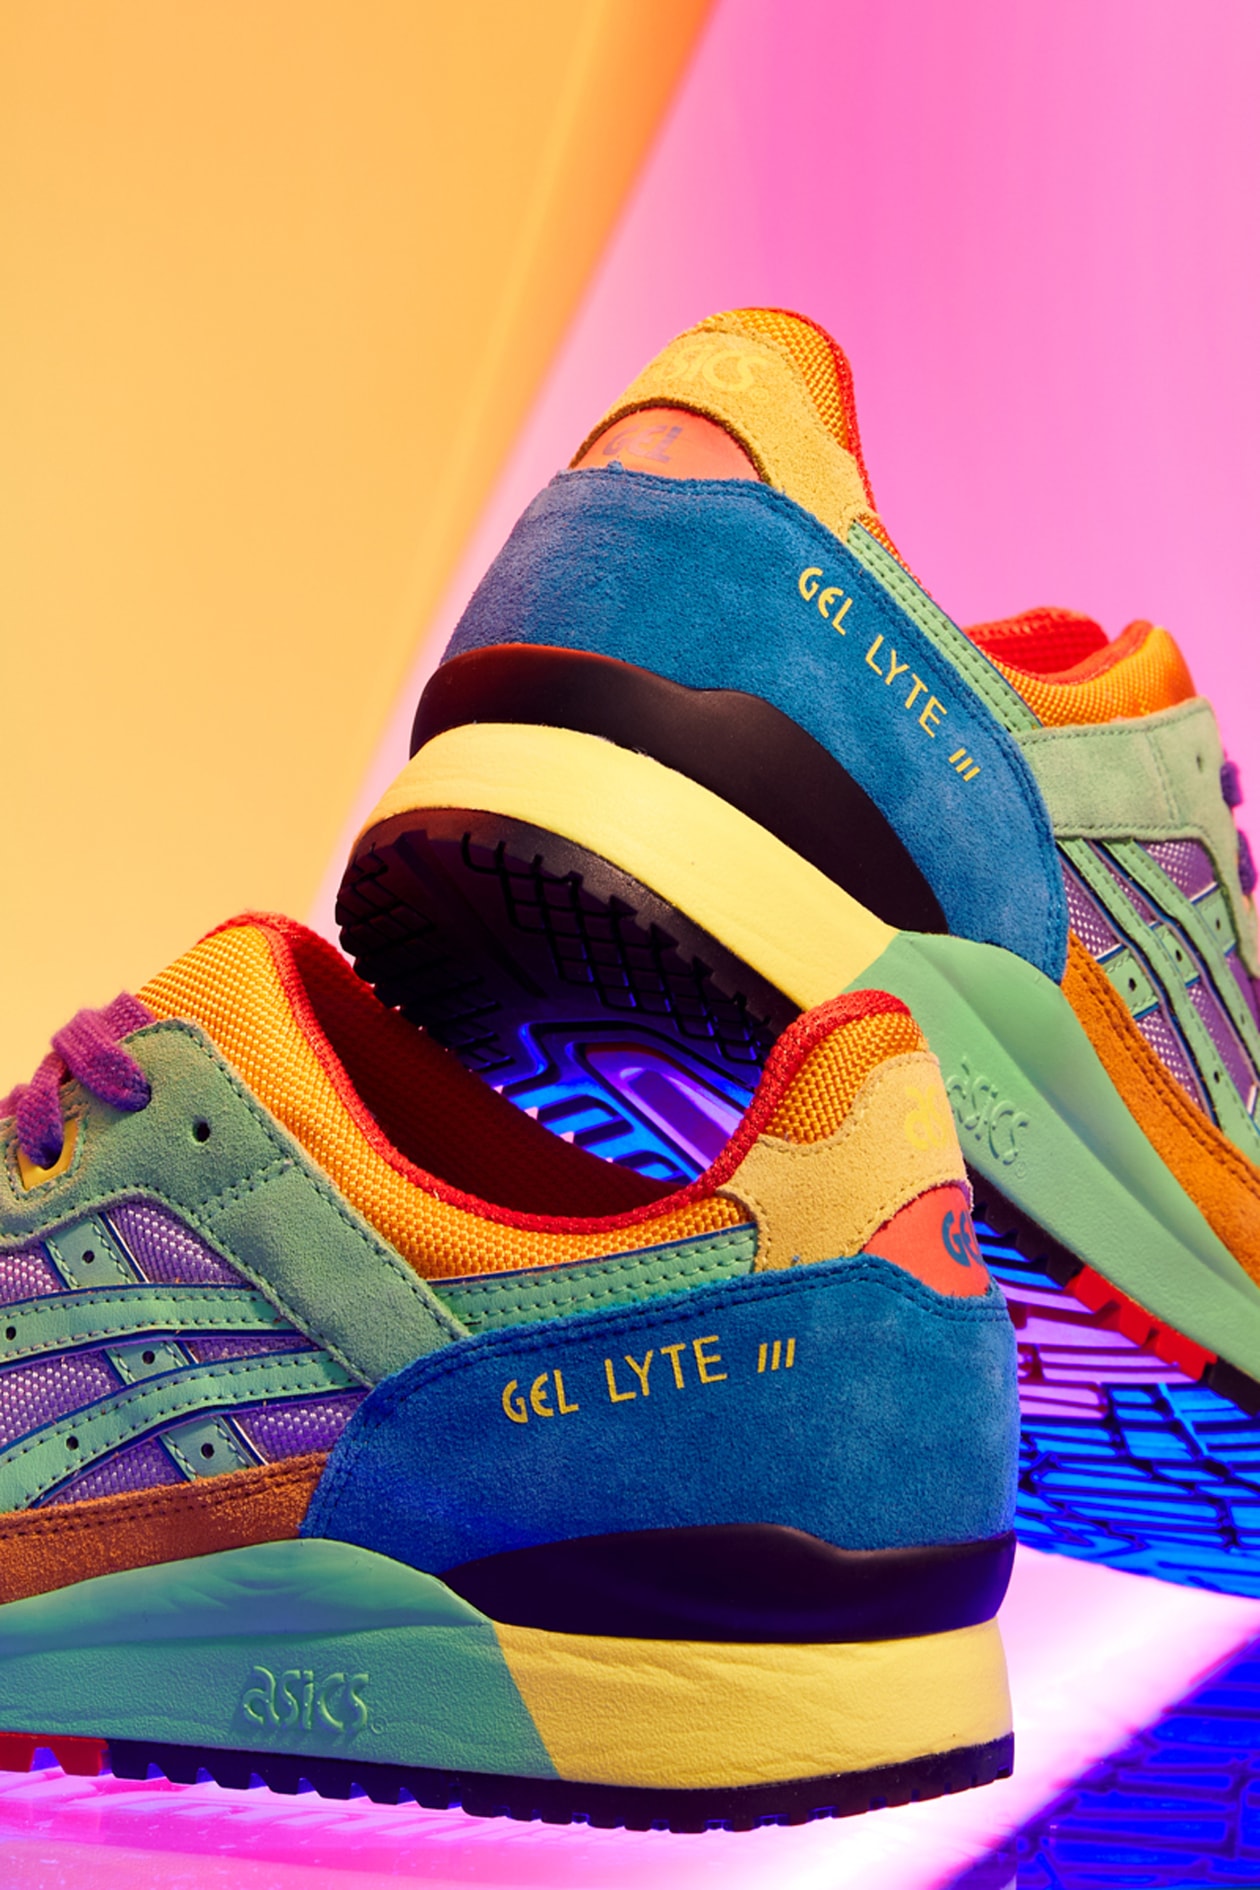 GEL-LYTE III, GEL-LYTE, LYTE-CLASSIC, TARTHER BLAST silhouettes performance runners color palette heritage many colorways styles 